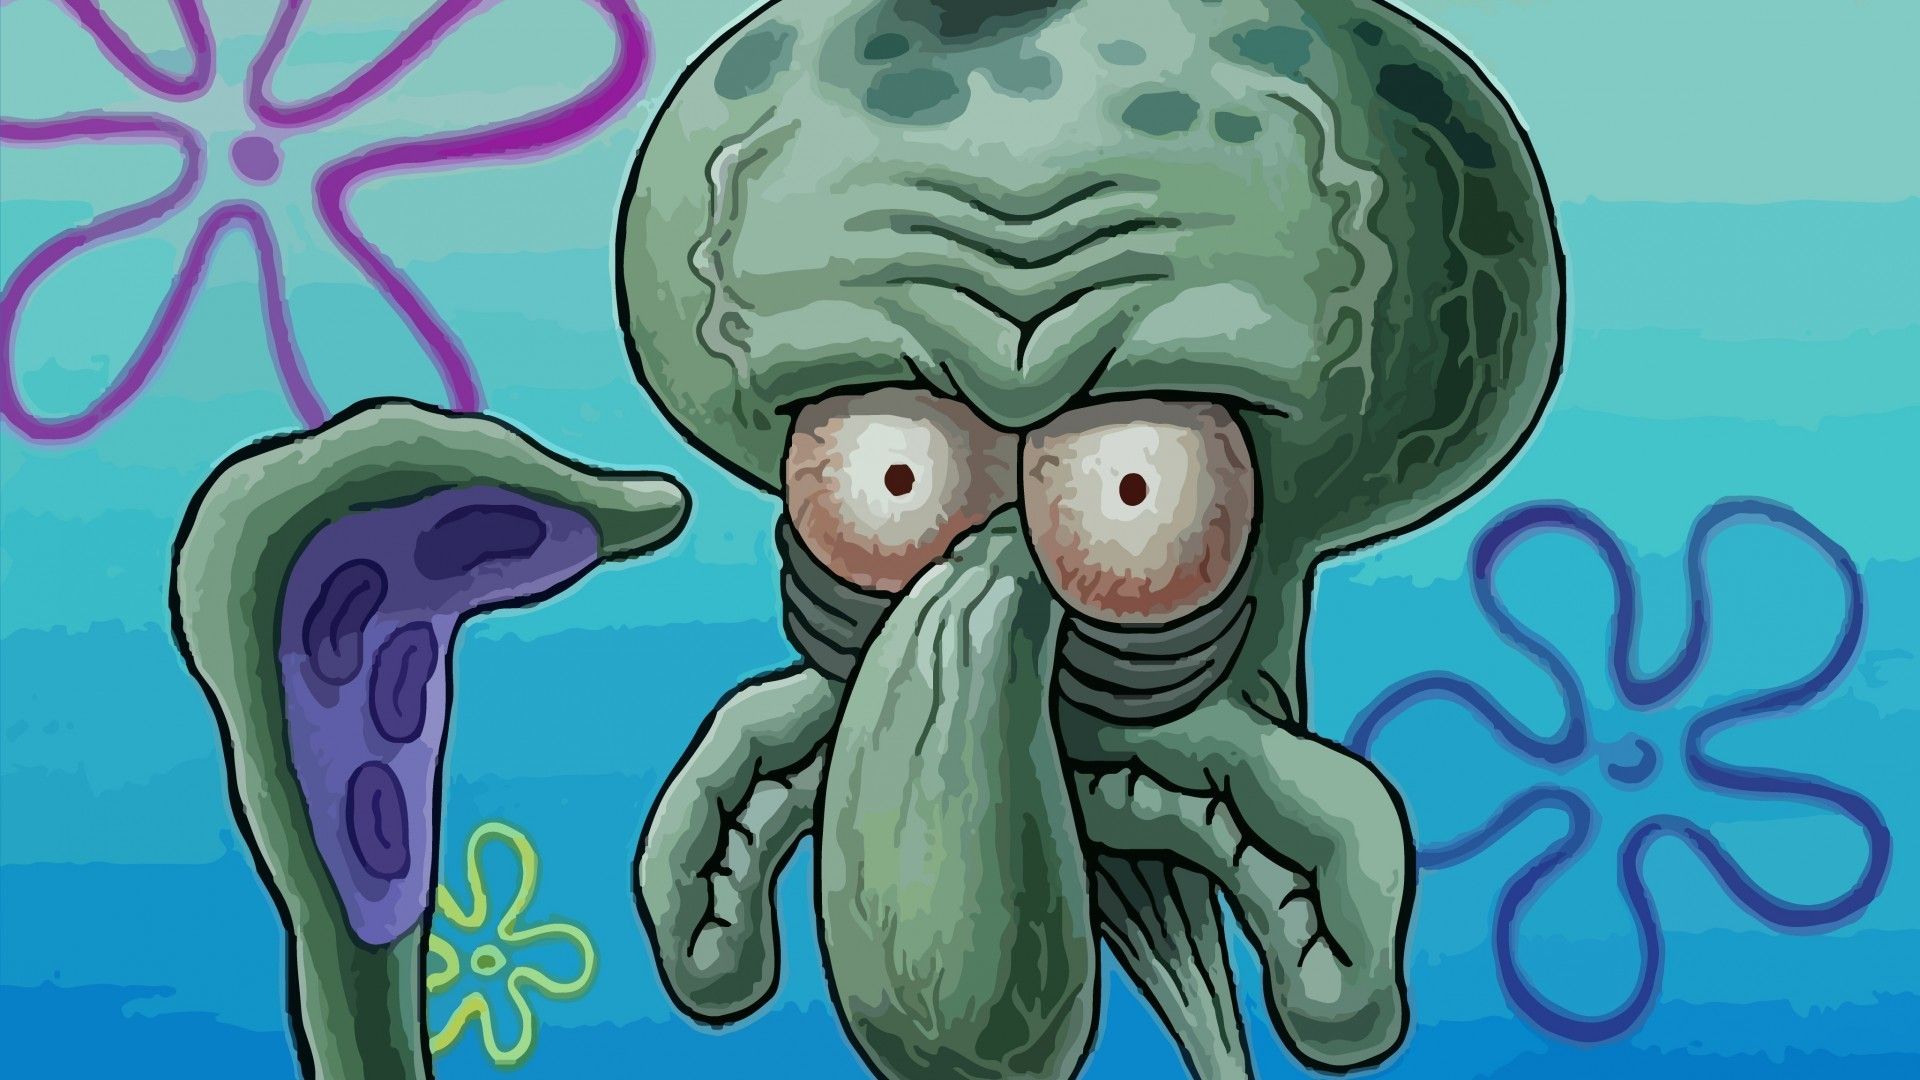 Squidward Tentacles from Spongebob Squarepants is seen in this illustration. - Squidward